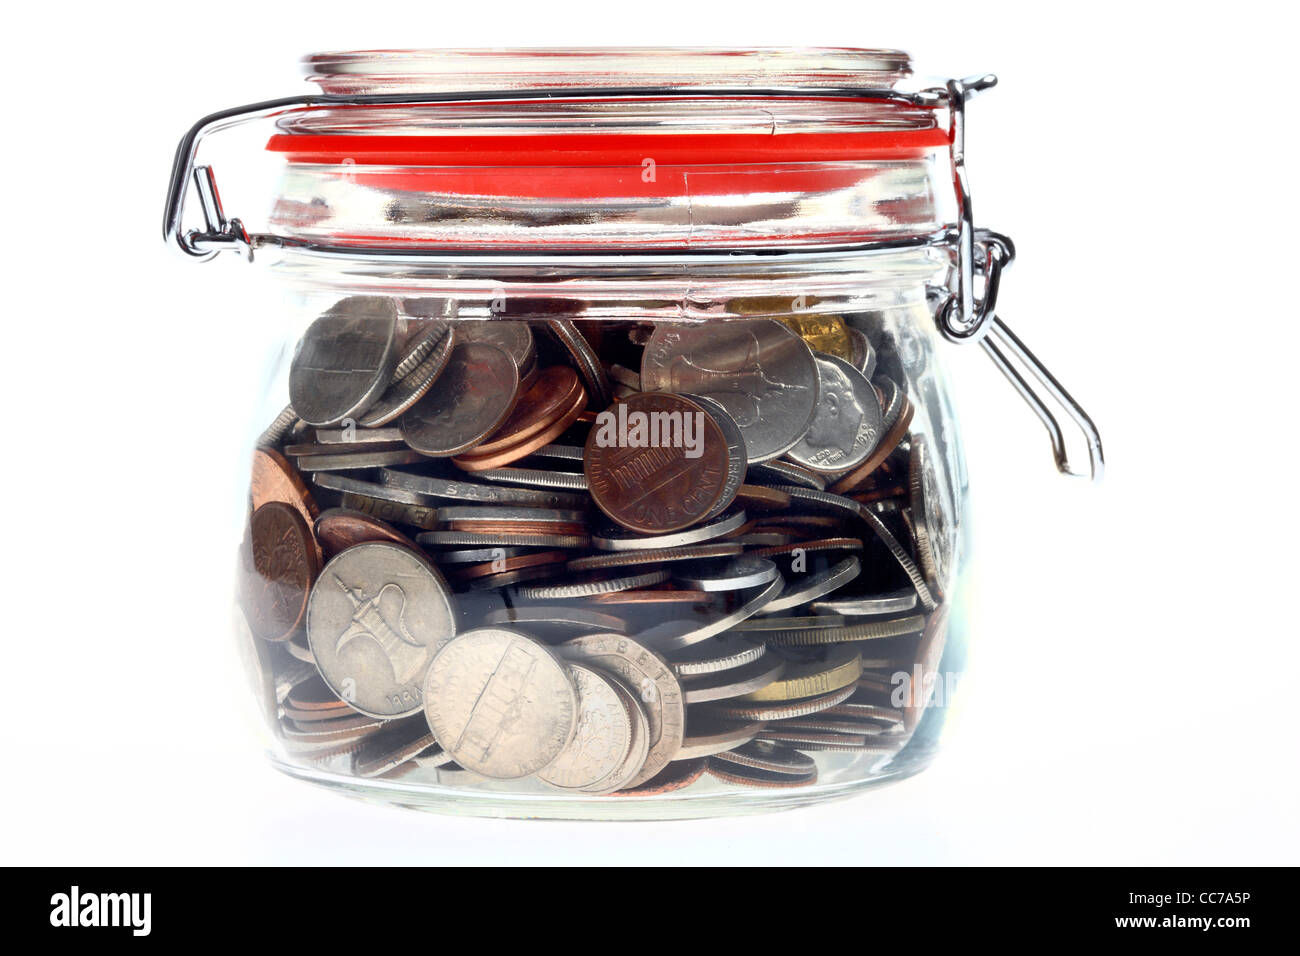 Money in a glass, preserving jar,  coins, different kinds of coins, from different country's, different currency's. Stock Photo